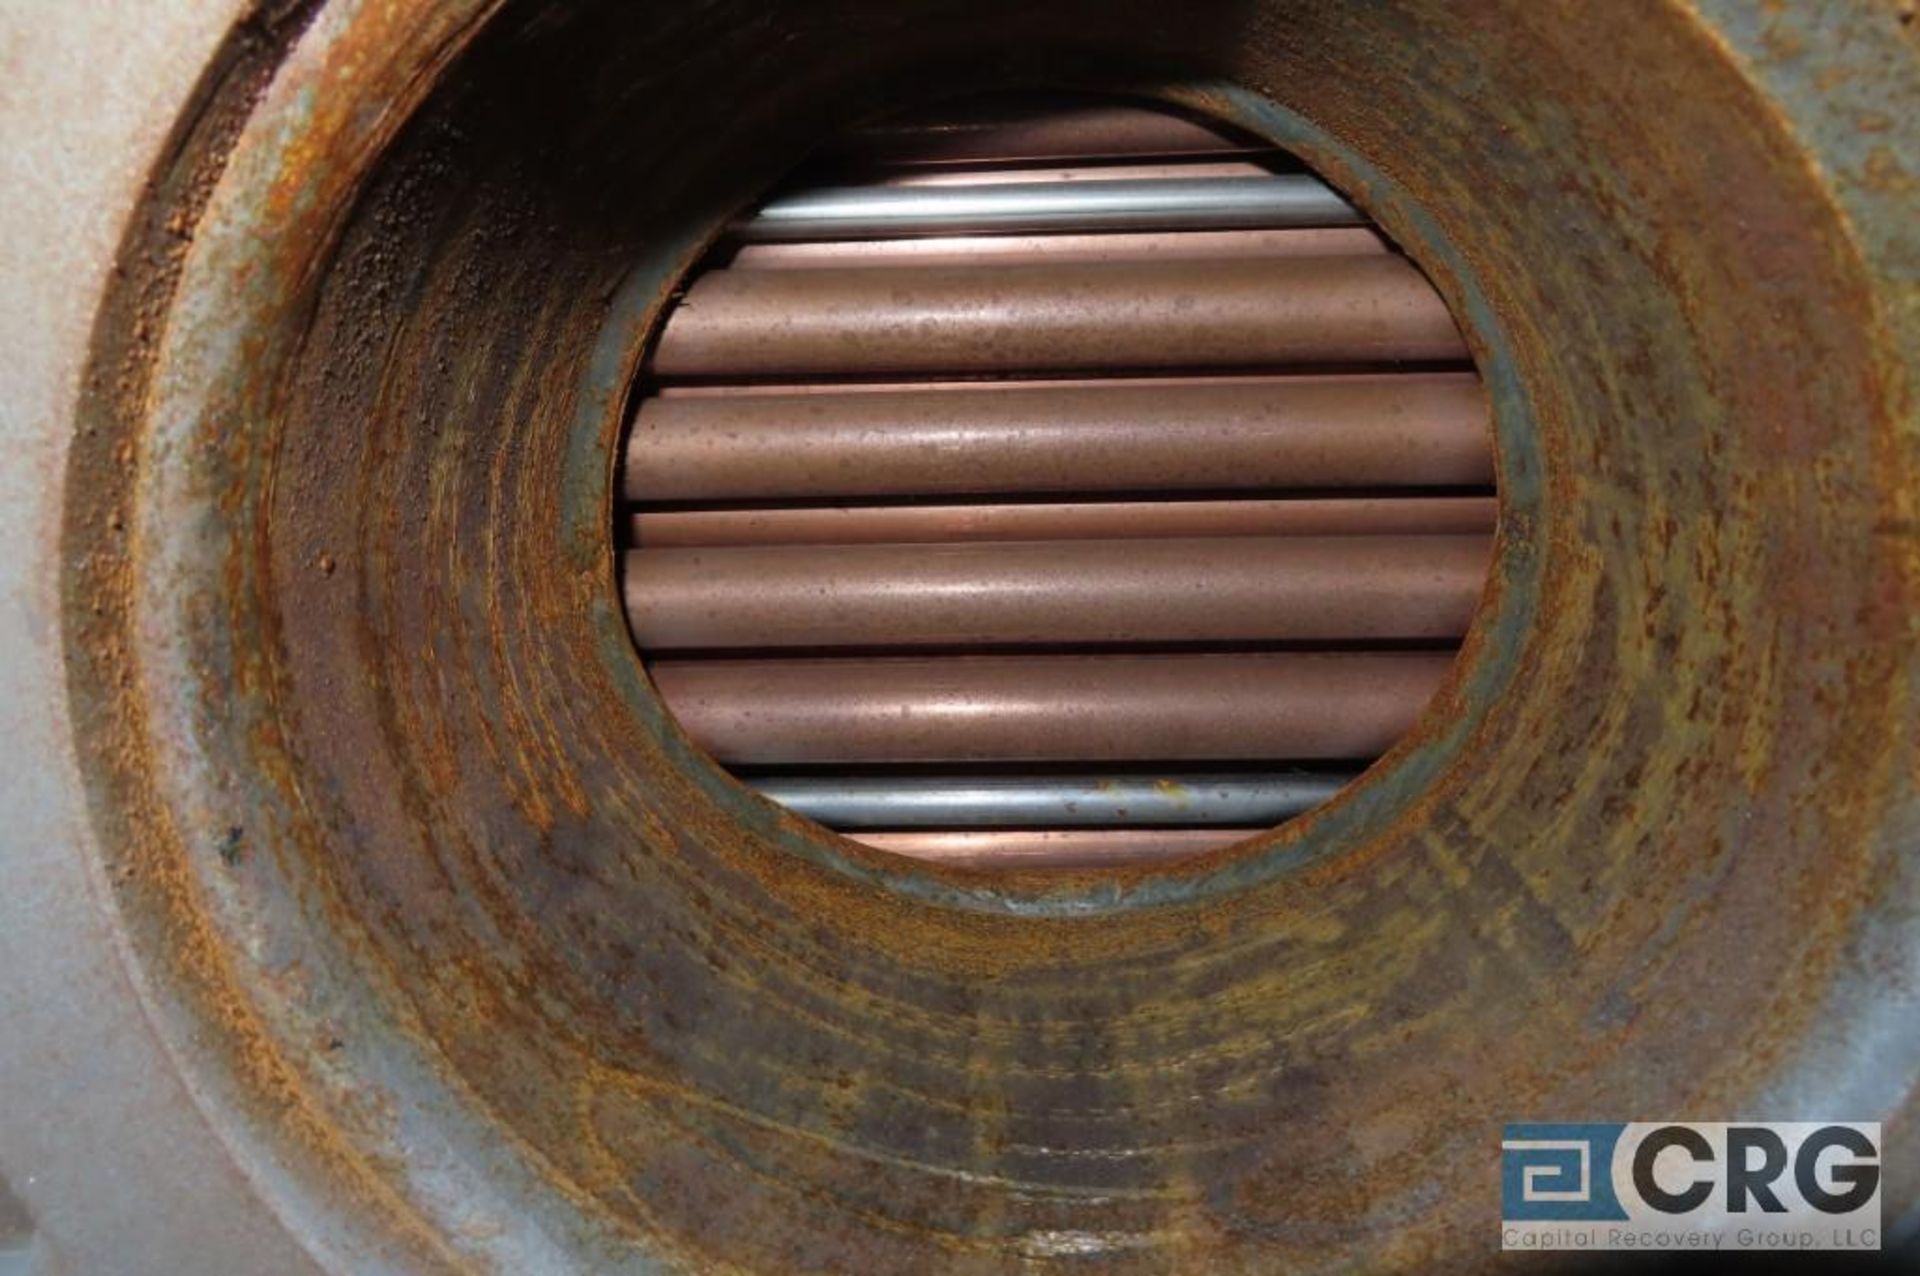 Bell & Gossett heat exchanger, tube in shell - Location: Finished Warehouse - Image 3 of 3